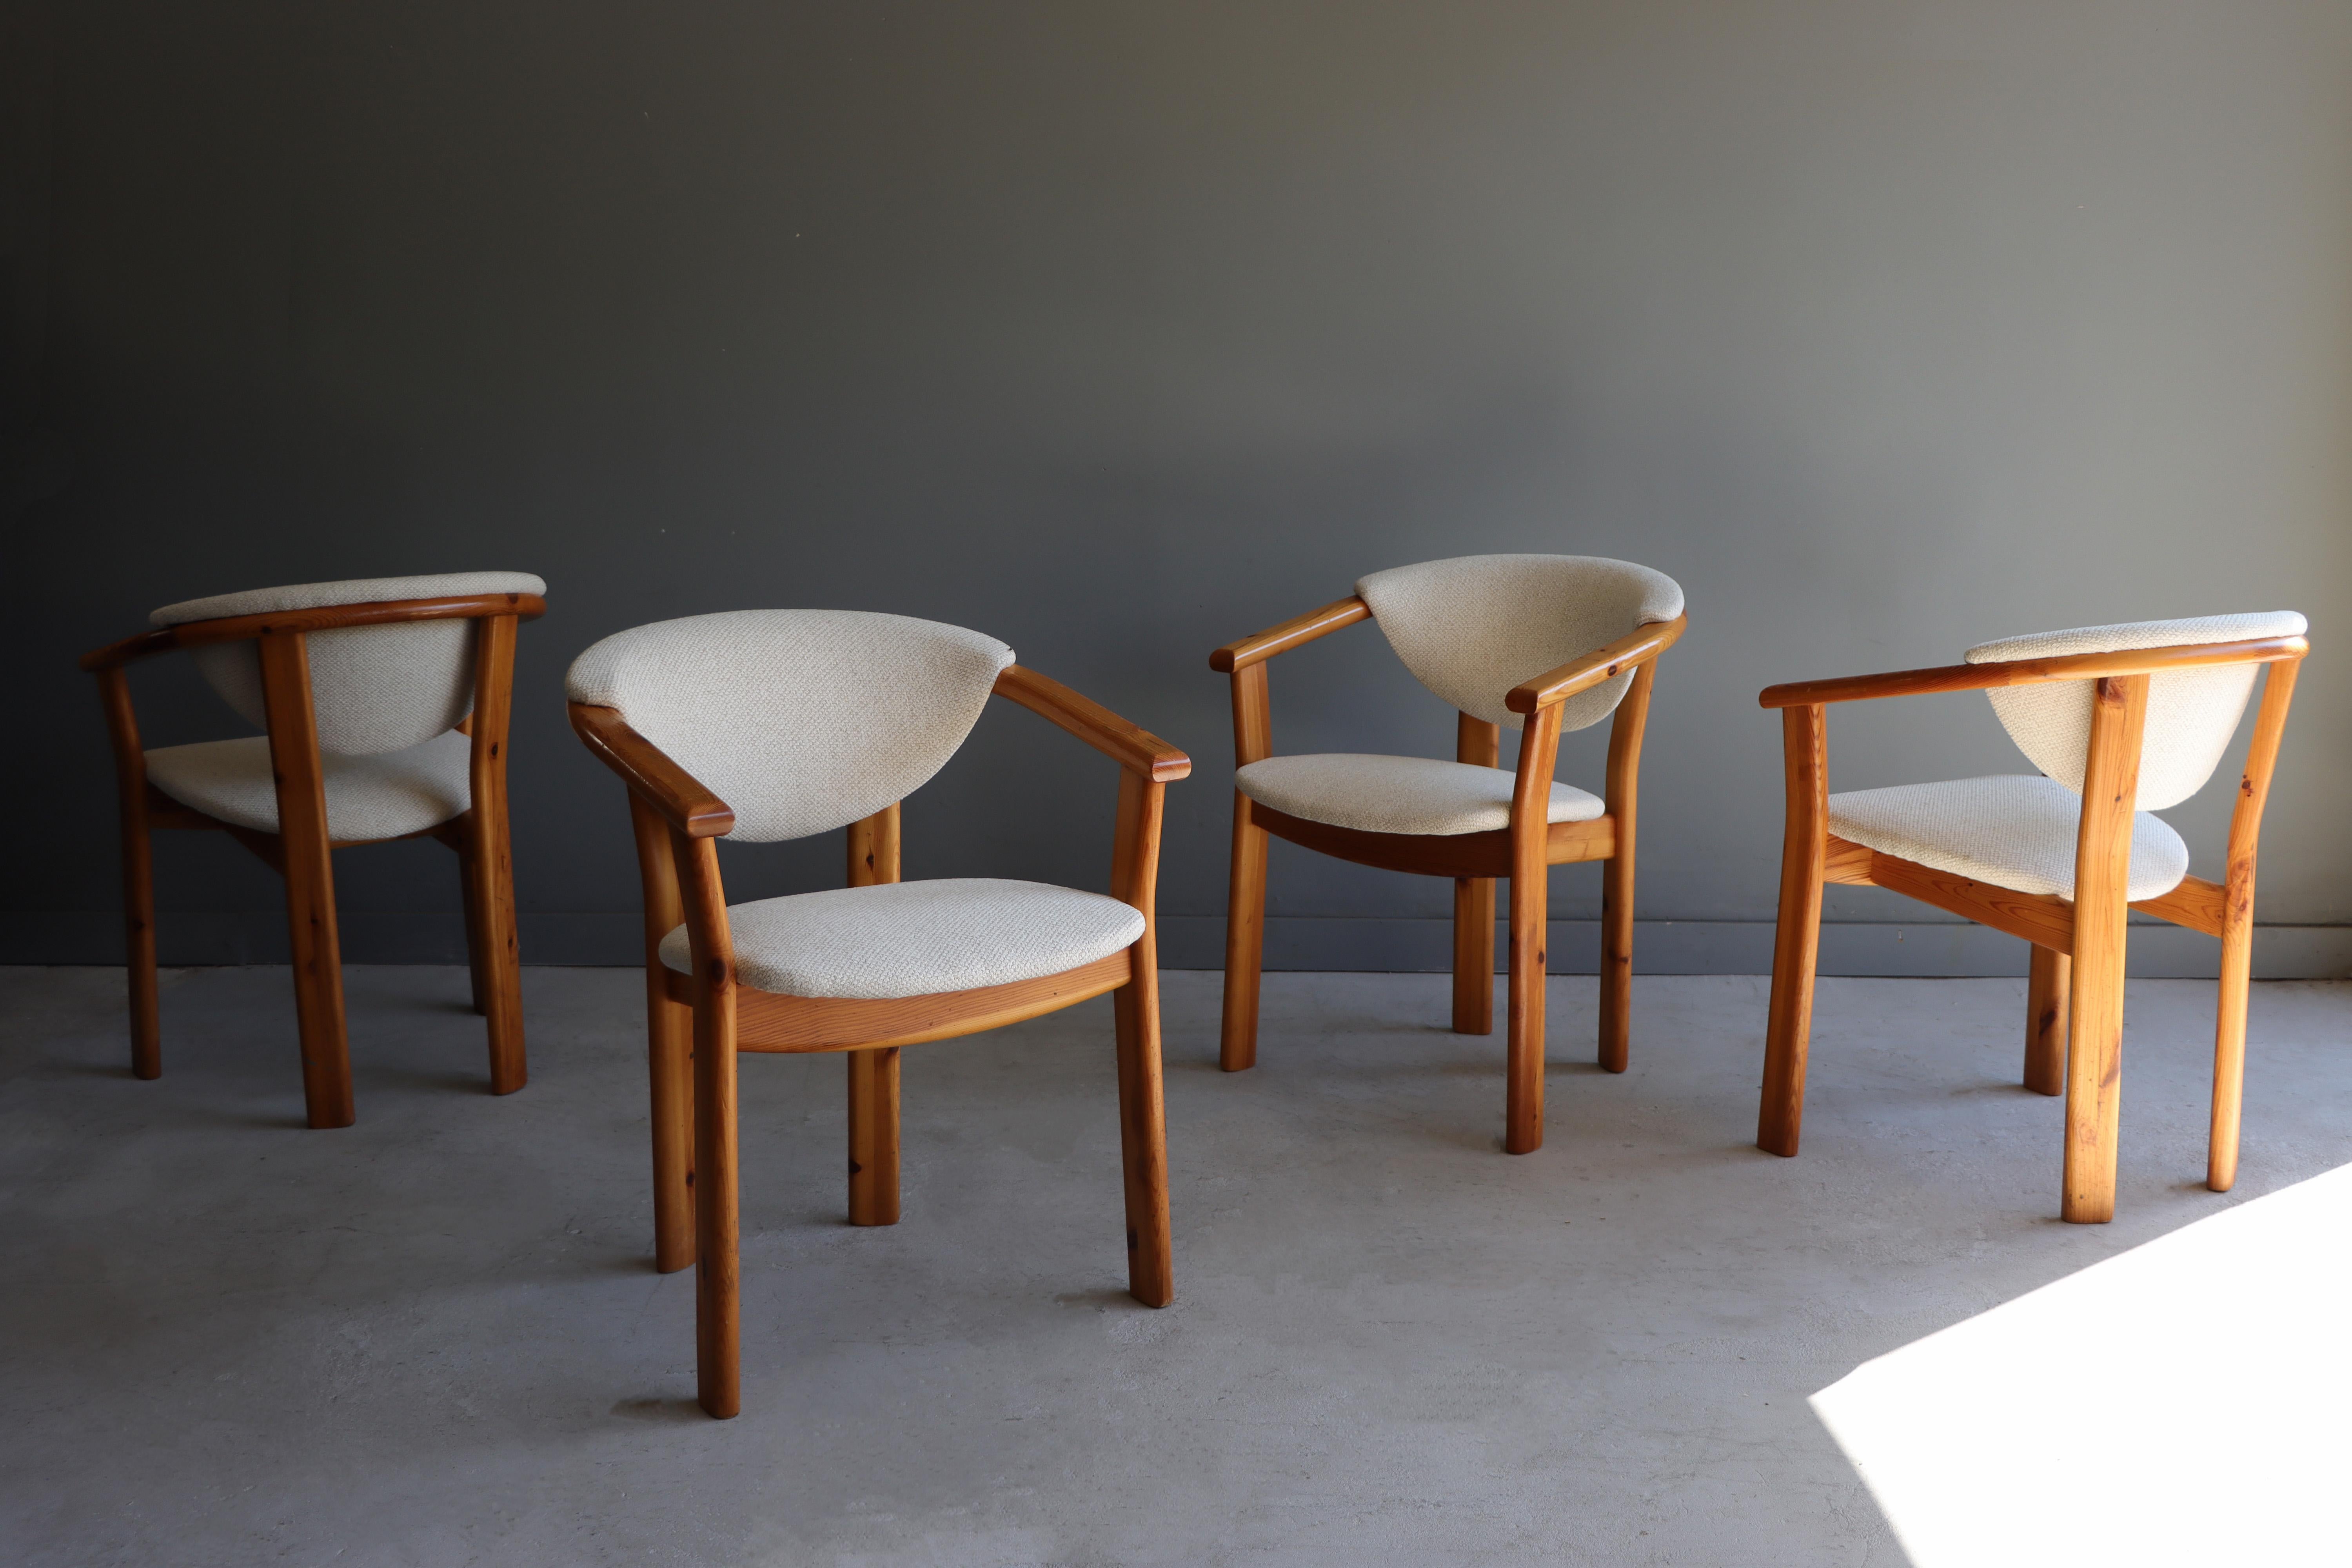 Beautiful set of vintage Scandinavian armed dining chairs. These sculptural chairs are executed in solid pine and have been reupholstered in Knoll Whitewall fabric. While the manufacturer is unknown, these chairs check all the boxes. Each backrest